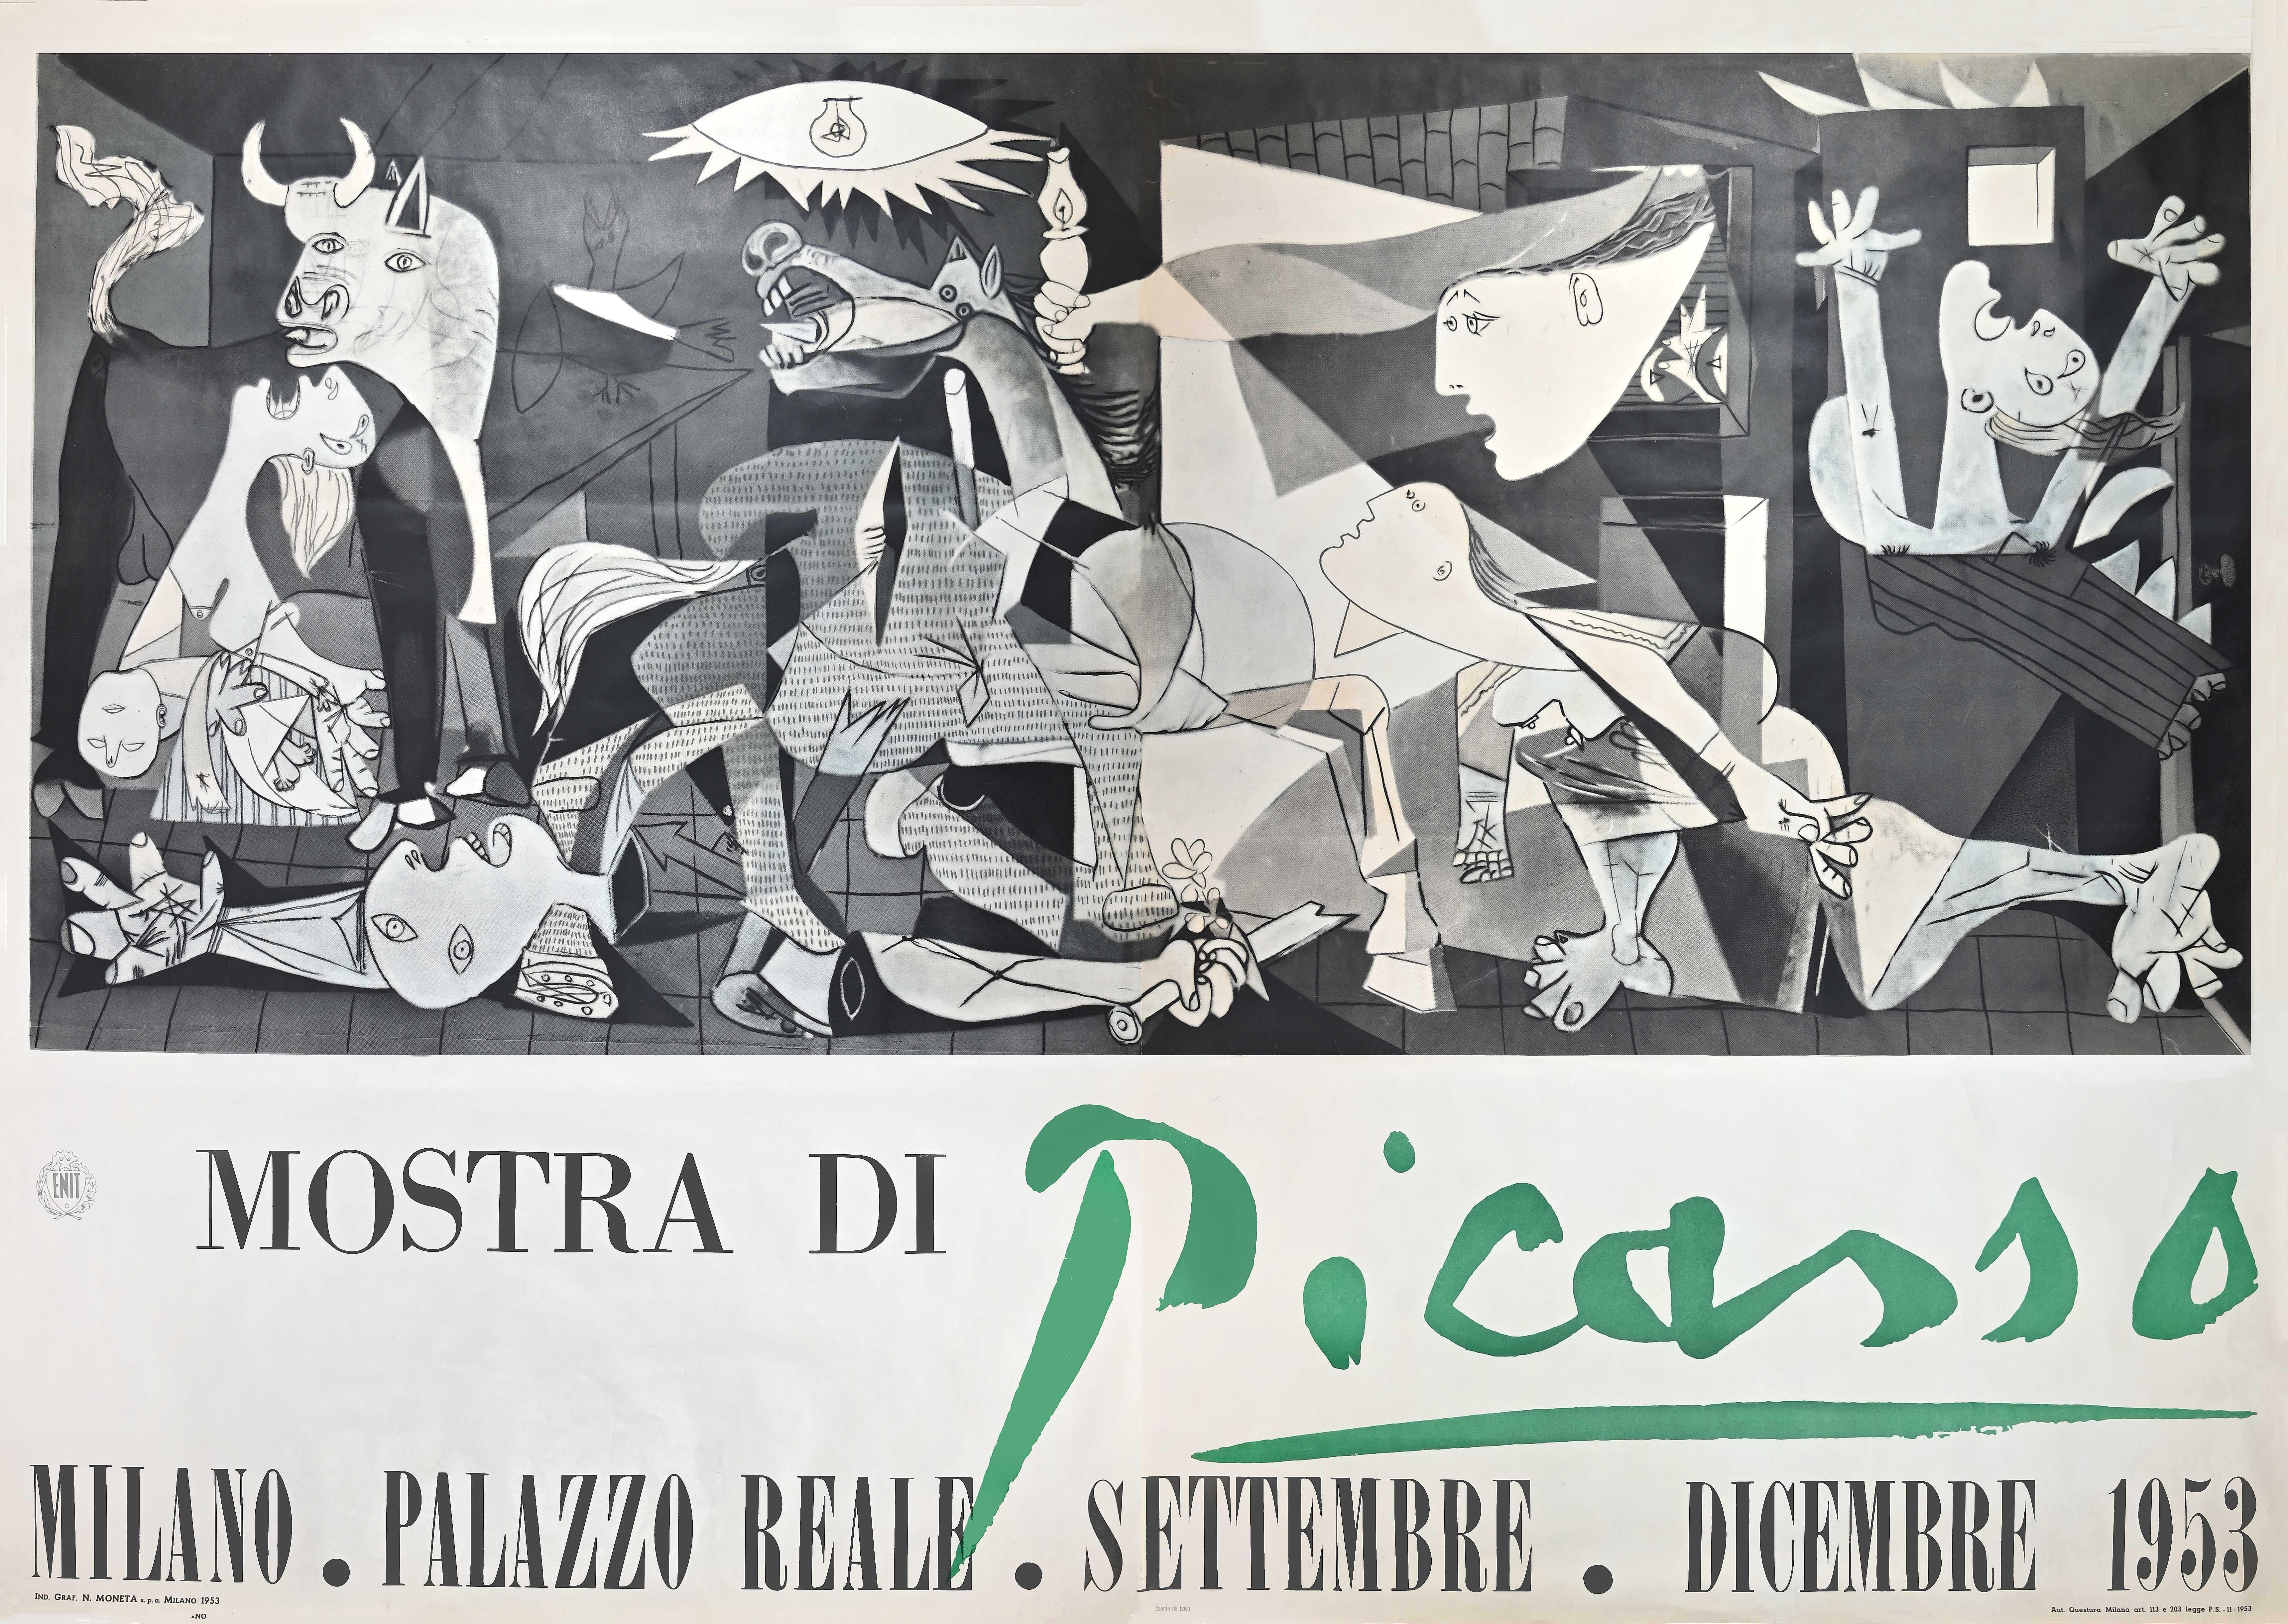 Pablo Picasso Print - After Picasso Exhibition Poster, "Mostra di Picasso, " depicting Guernica - 1953